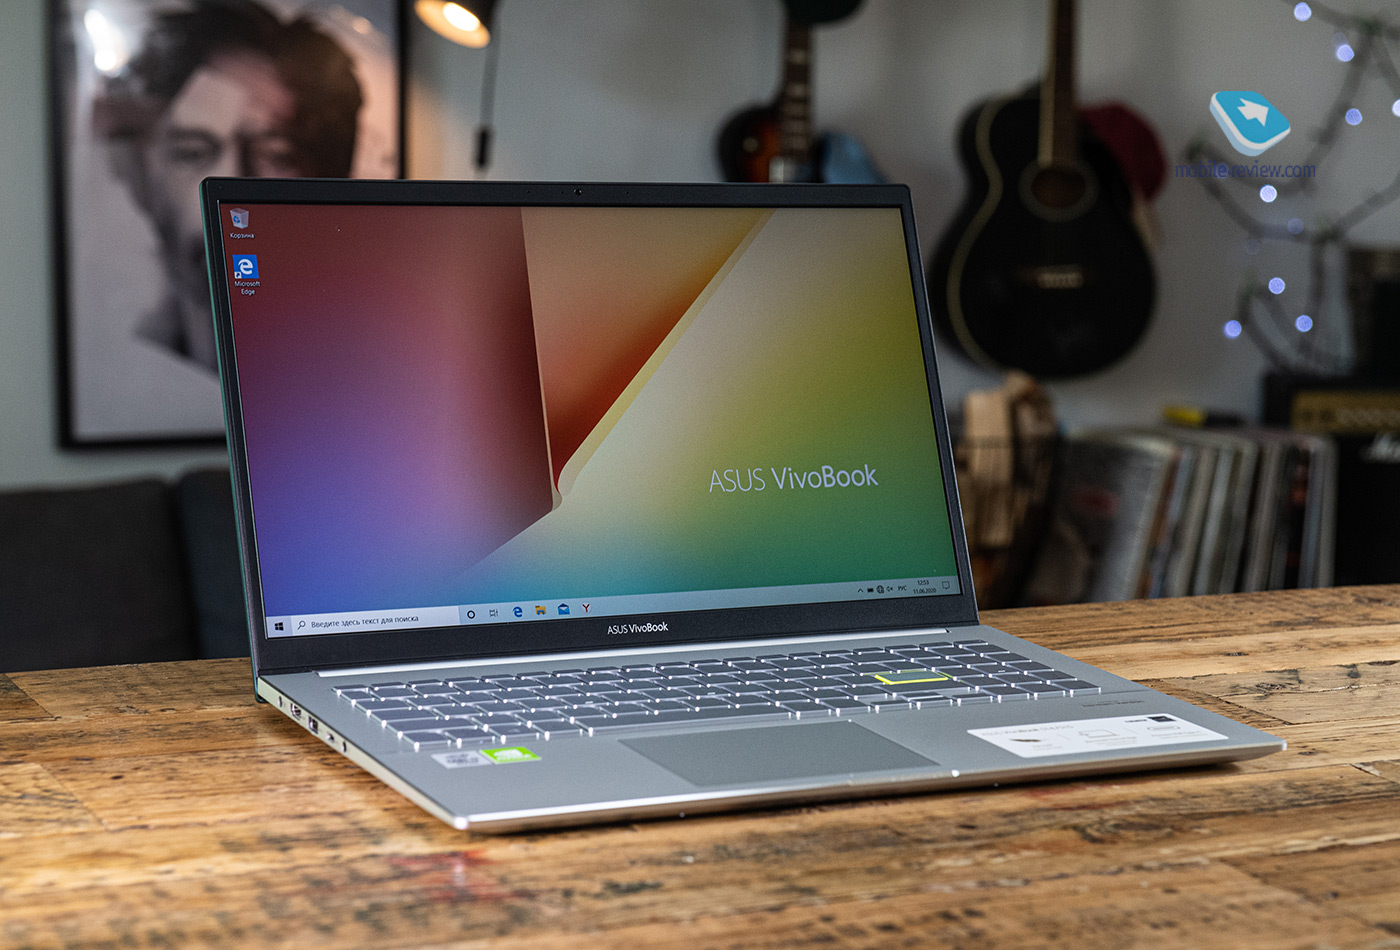 Asus VivoBook: Stylish laptops for students.